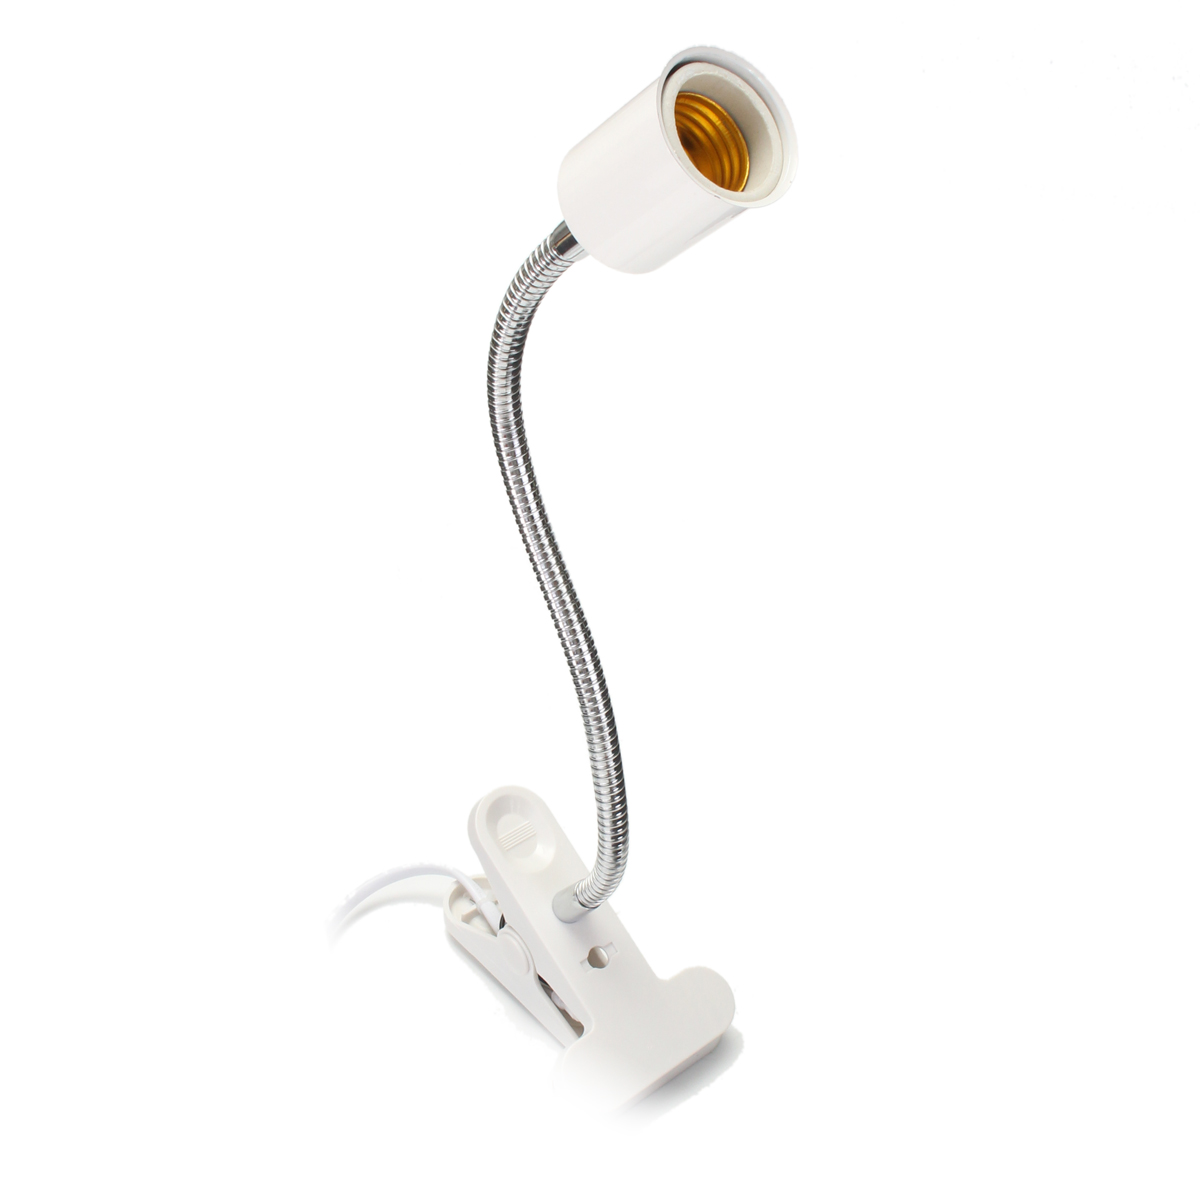 30CM-E27-Flexible-Pet-Heat-LED-Light-Bulb-Adapter-Lamp-Holder-Socket-with-Clip-On-Off-Switch-1309544-1